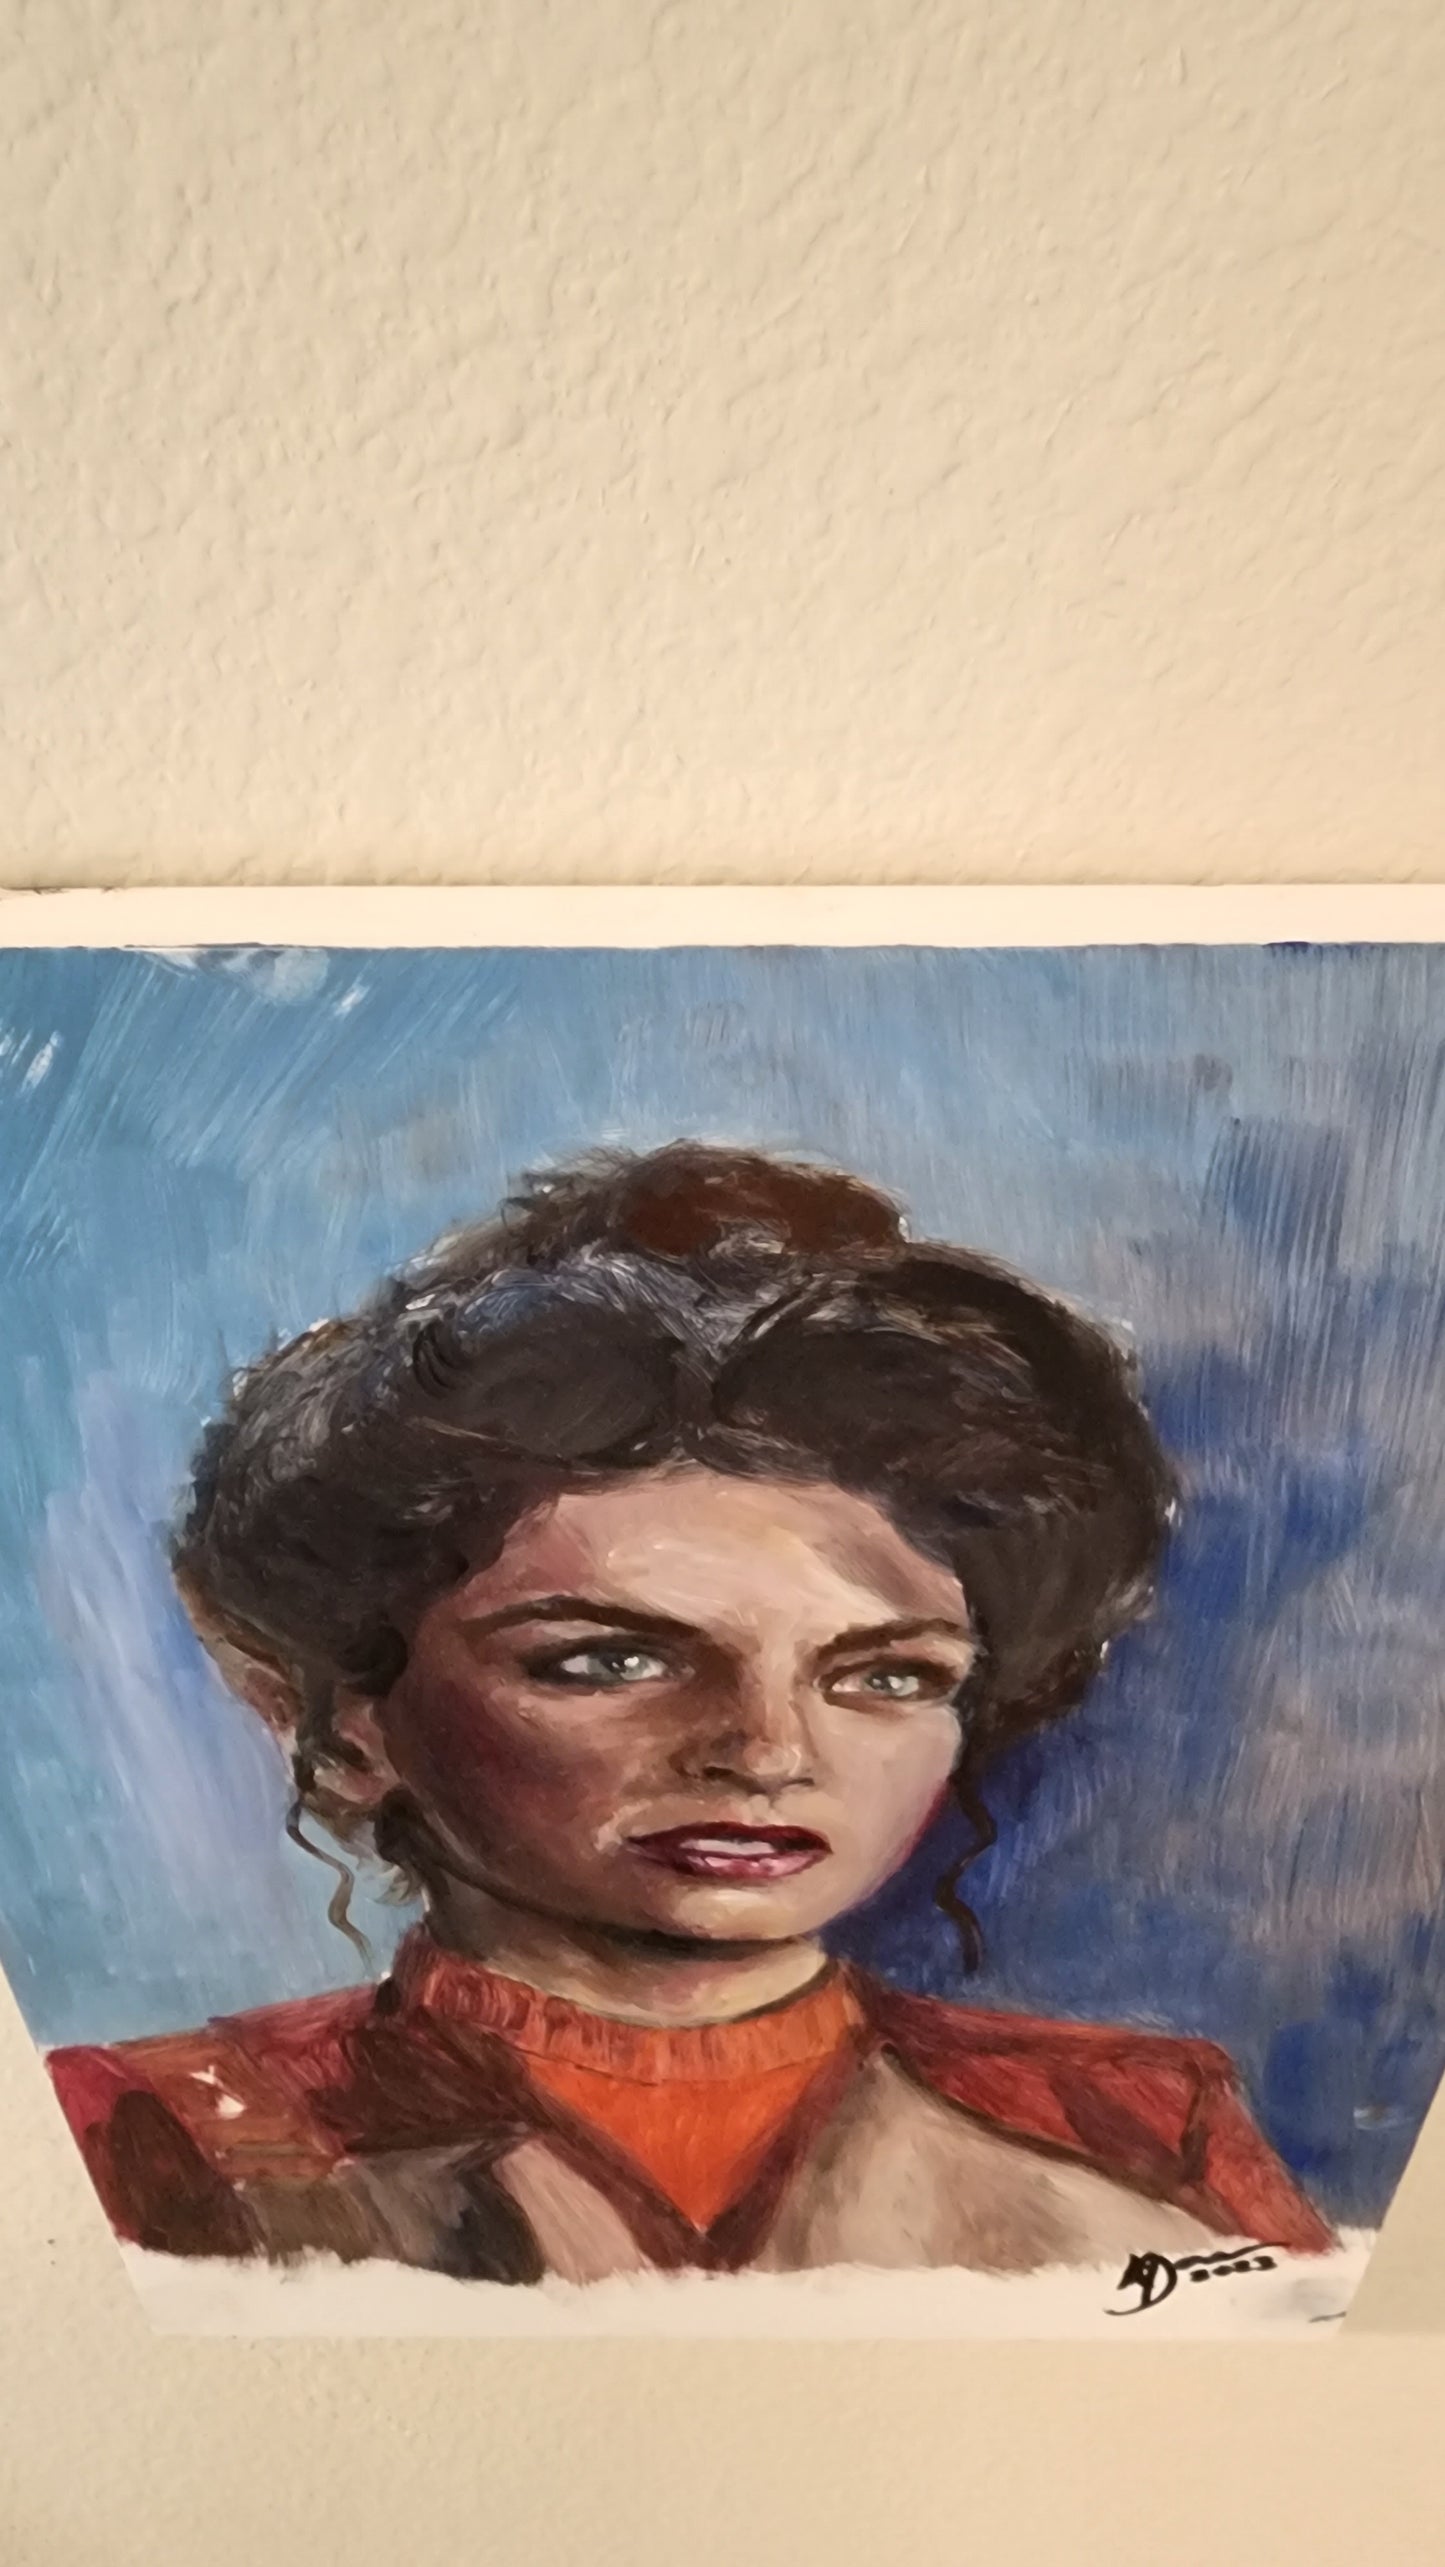 Kirstie Alley "ST2" Painting